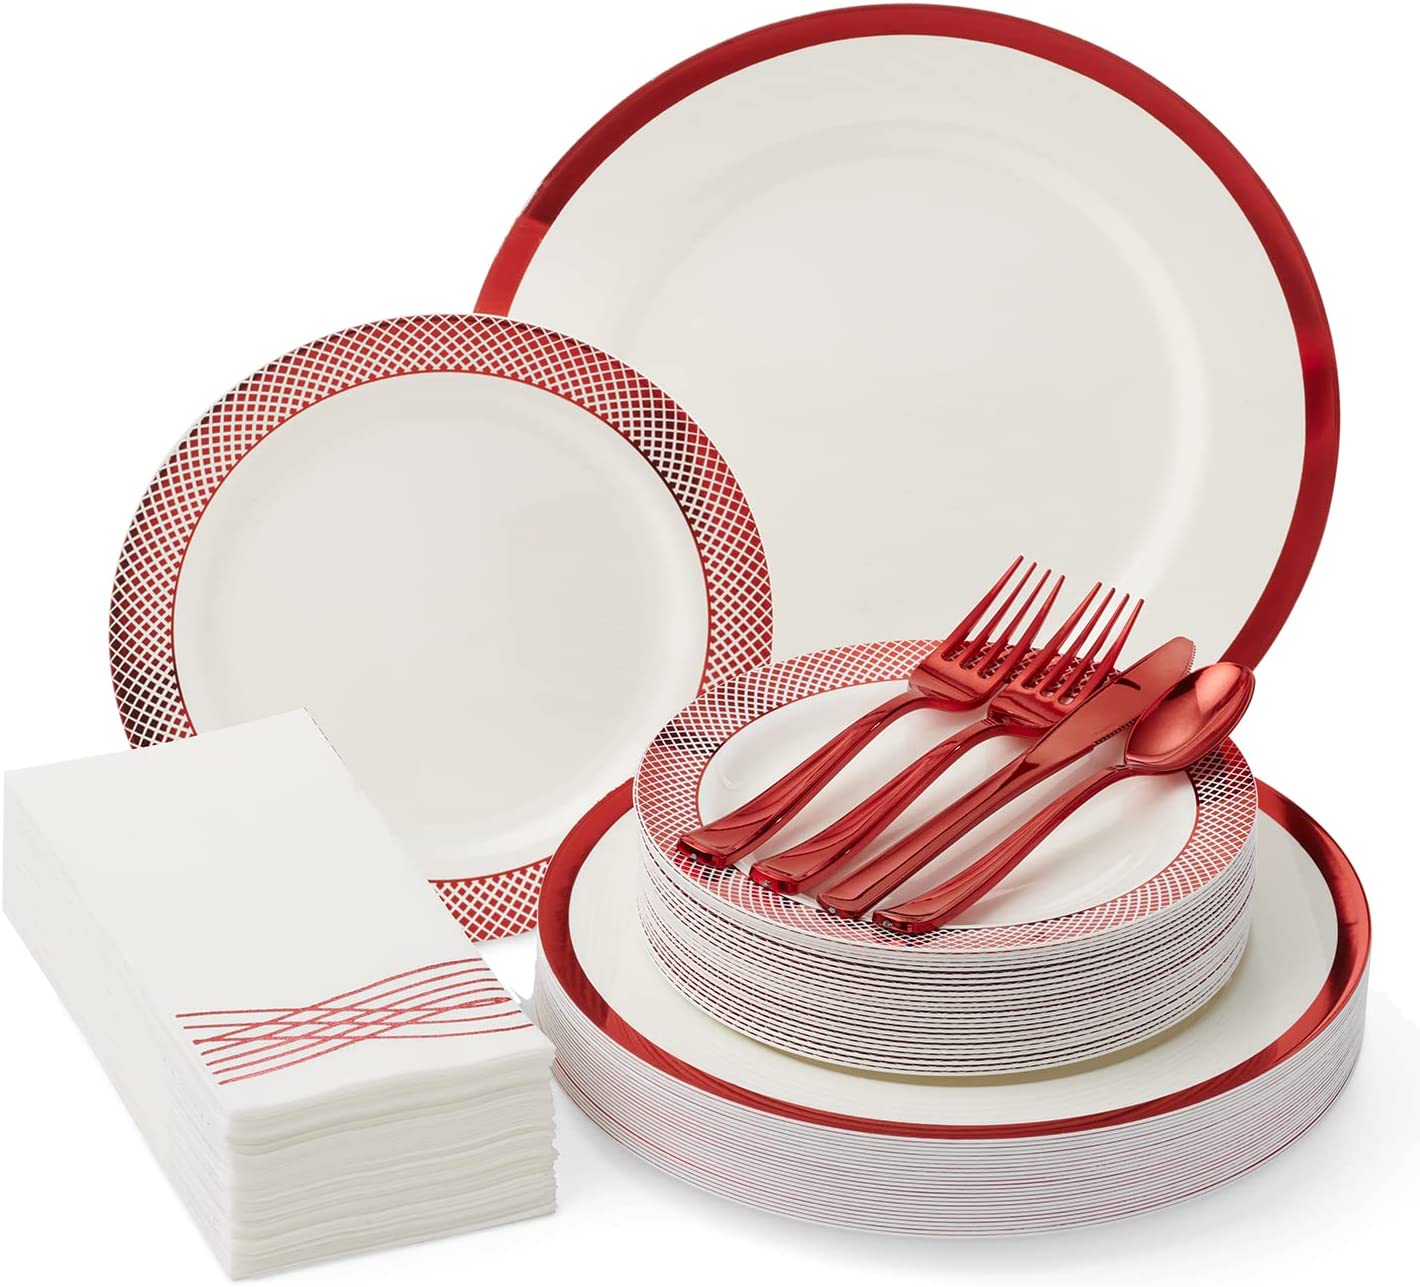 BY MADEE: Rose Gold Plastic Plates Disposable Dinnerware Set for 25 Guests